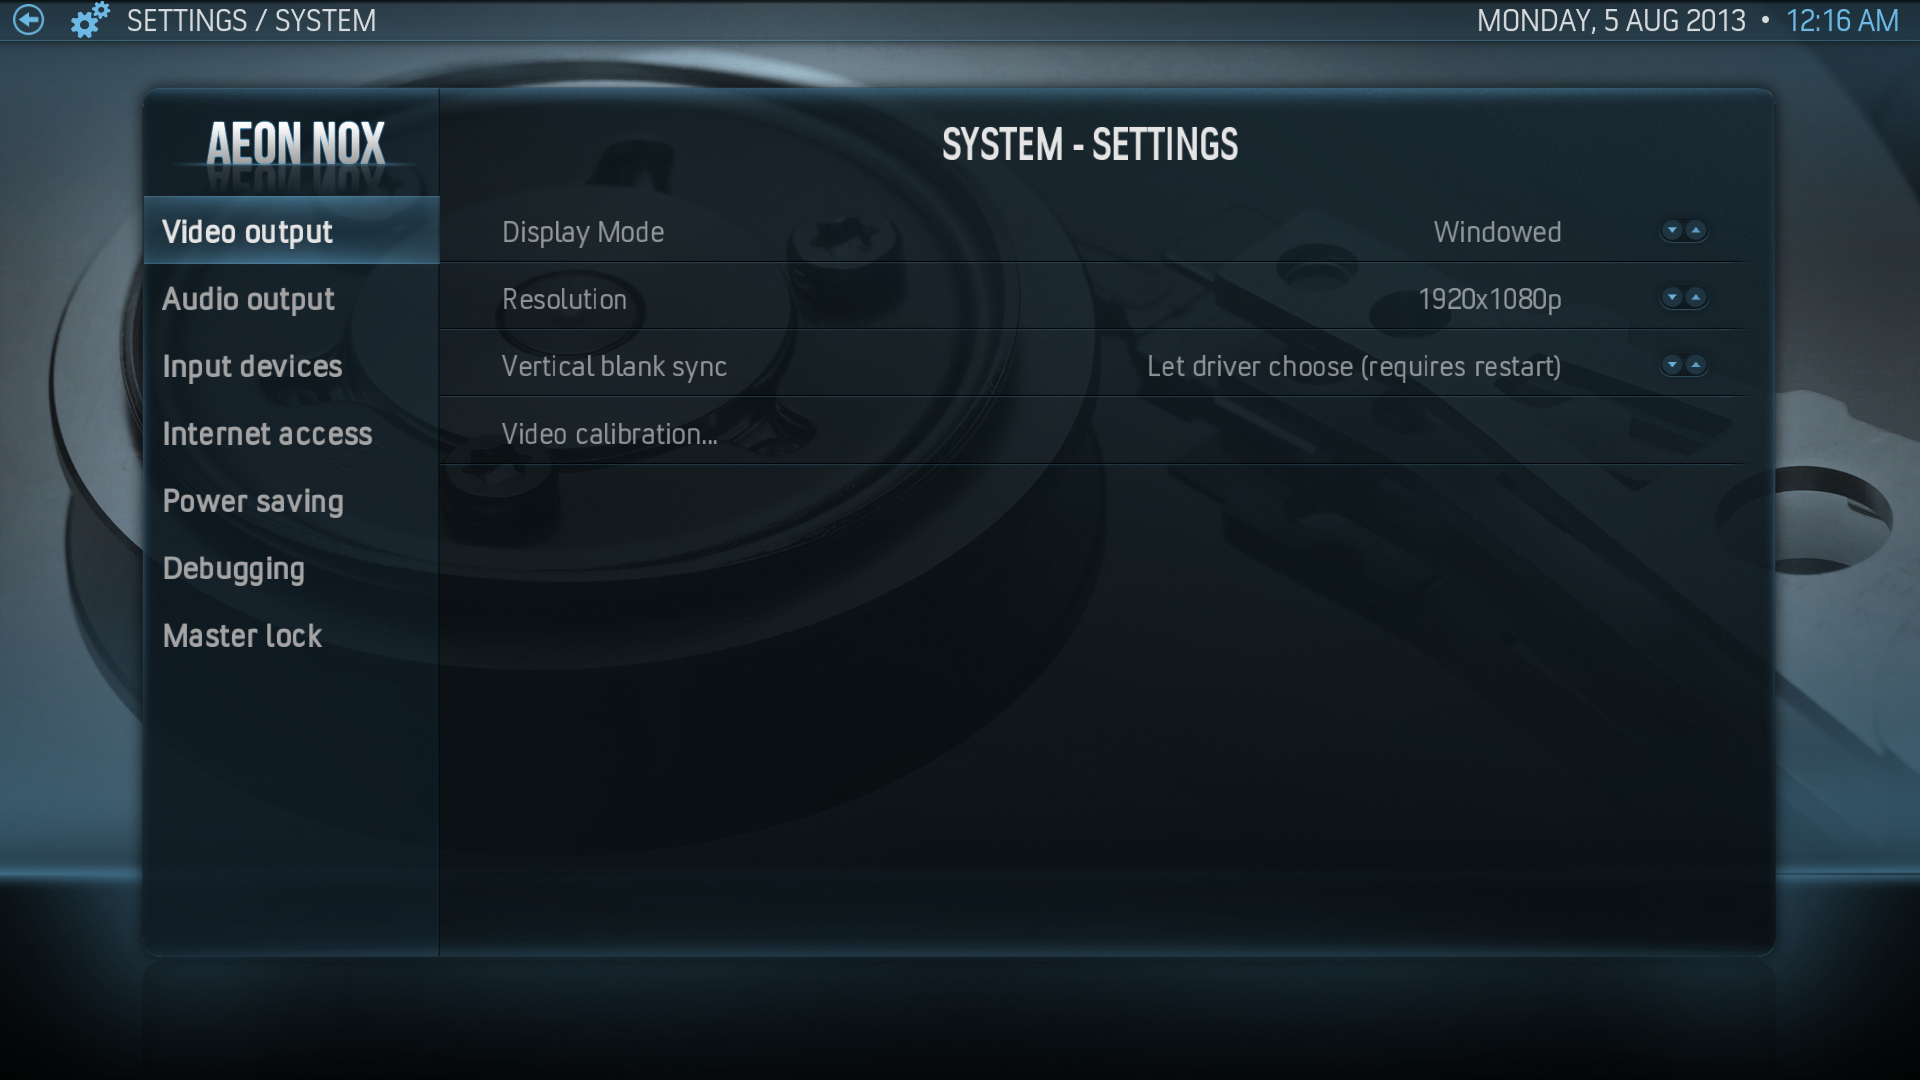 System Settings -> Video Output